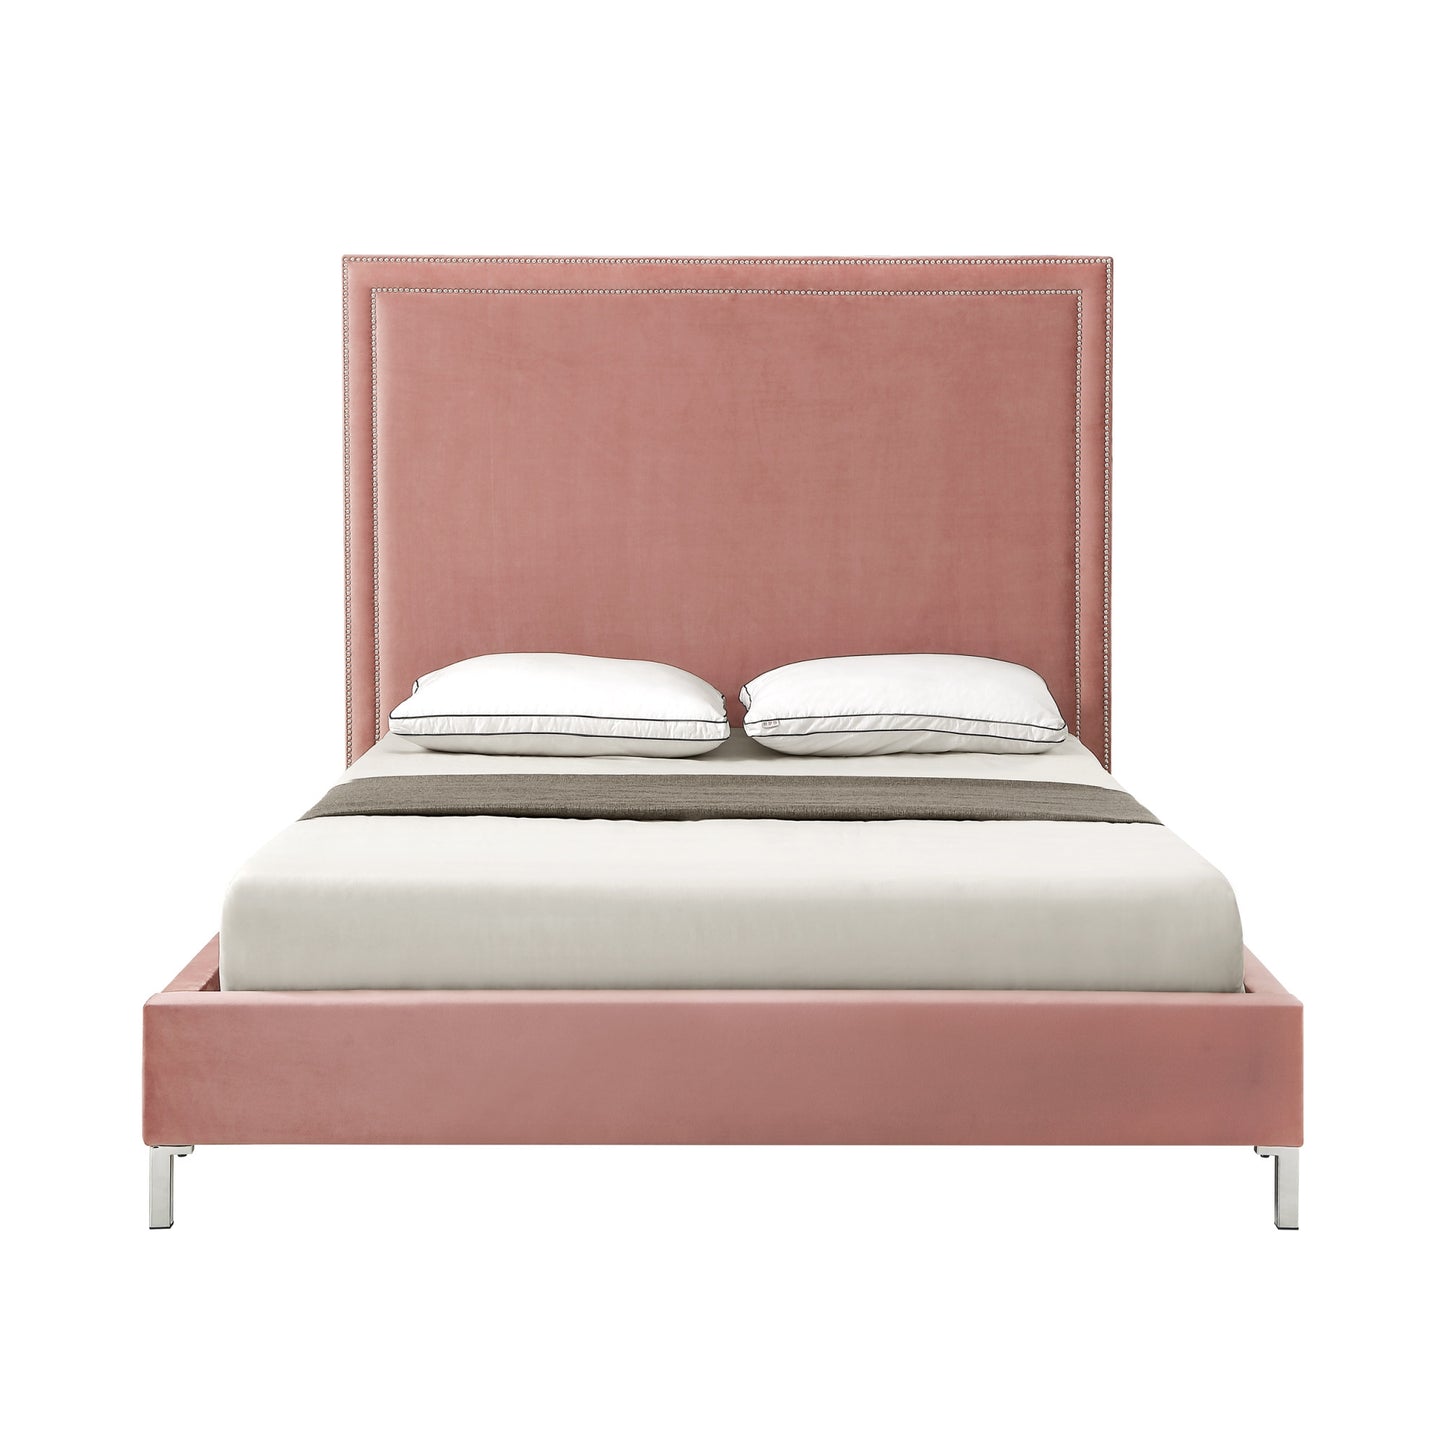 Blush Solid Wood Queen Upholstered Velvet Bed with Nailhead Trim